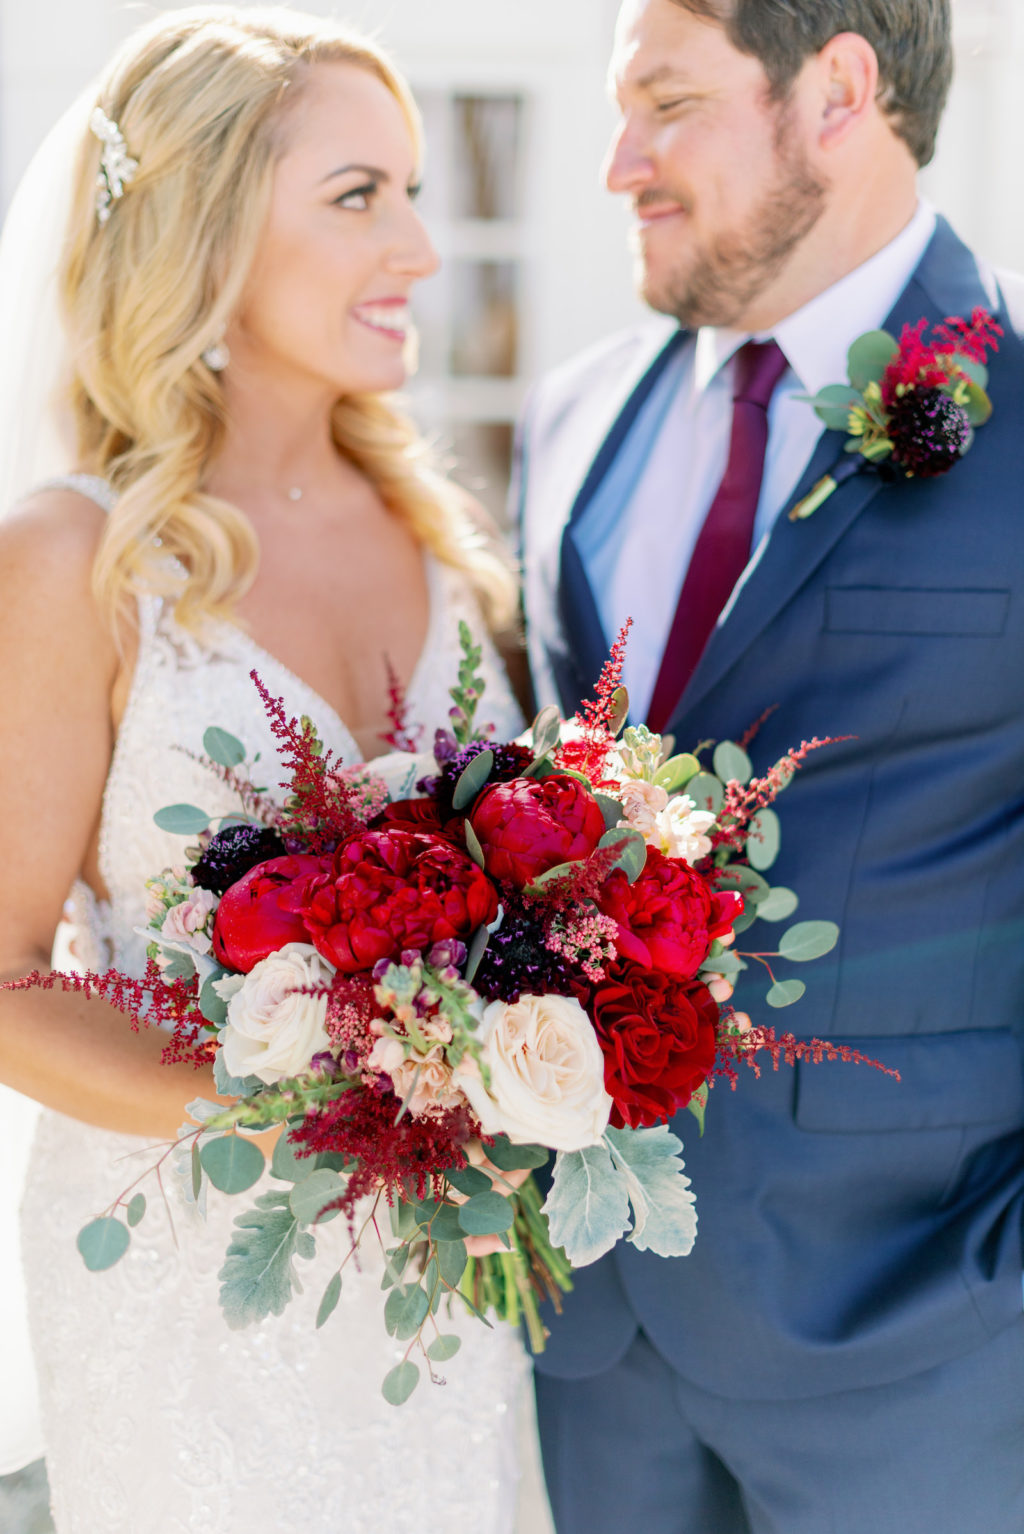 Romantic Rustic Glam Bride in Lace Wedding Dress Holding Red, Ivory and Greenery Floral Bouquet and Groom in Blue Suit | Tampa Bay Wedding Hair and Makeup Michele Renee the Studio